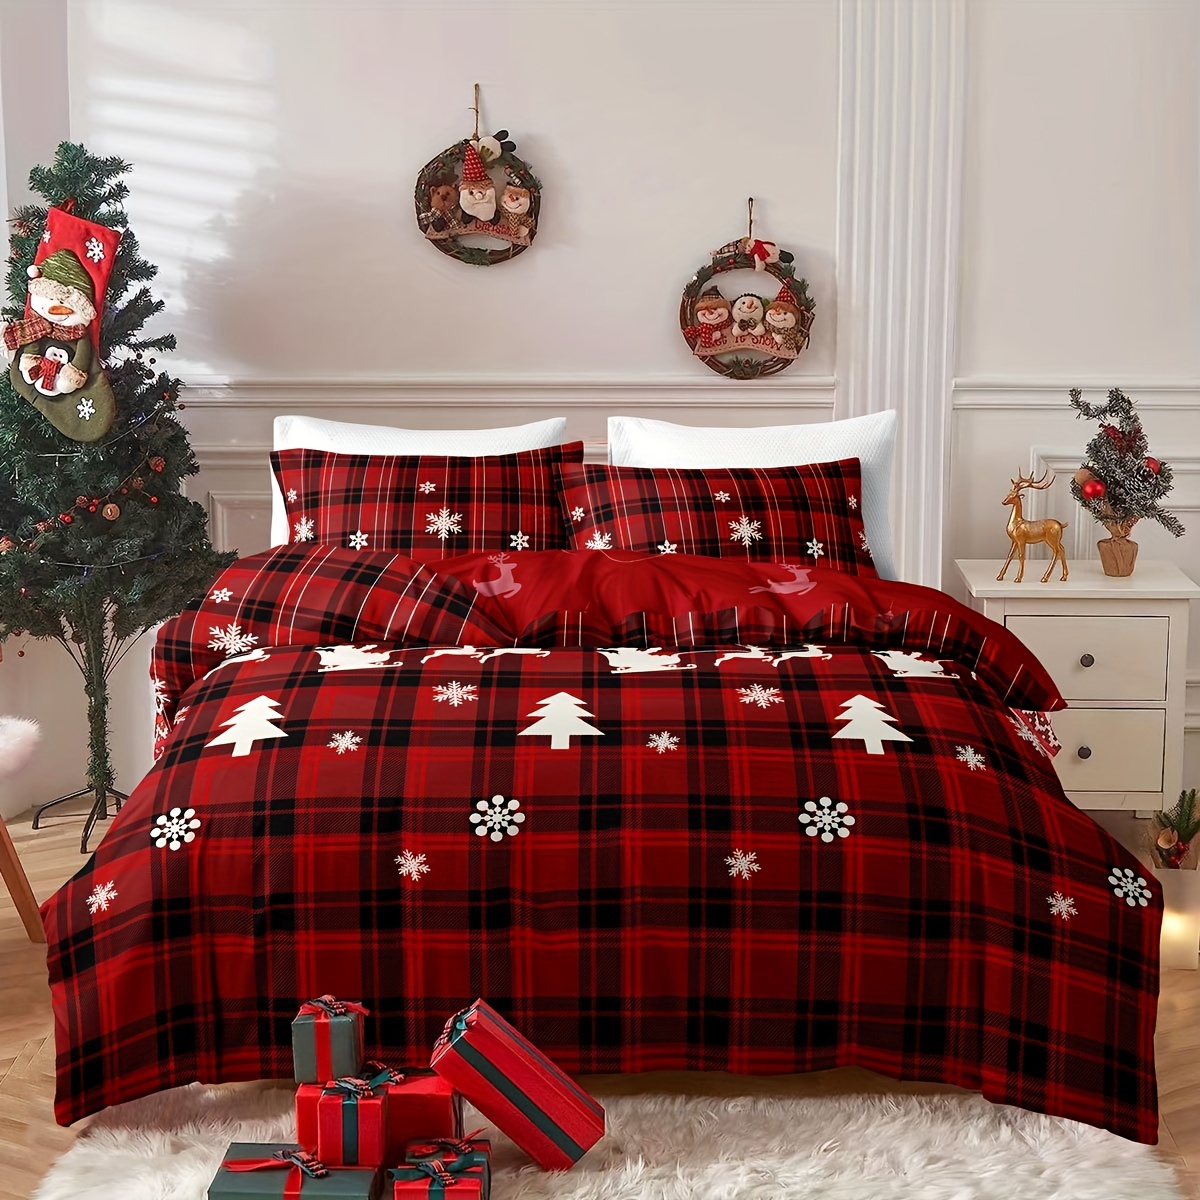 

3pcs Christmas Duvet Cover Set, Checkered Xmas Tree Elk Snowflake Print Bedding Set, Soft Comfortable Duvet Cover, For Bedroom, Guest Room (1*duvet Cover + 2*pillowcase, Without Core)